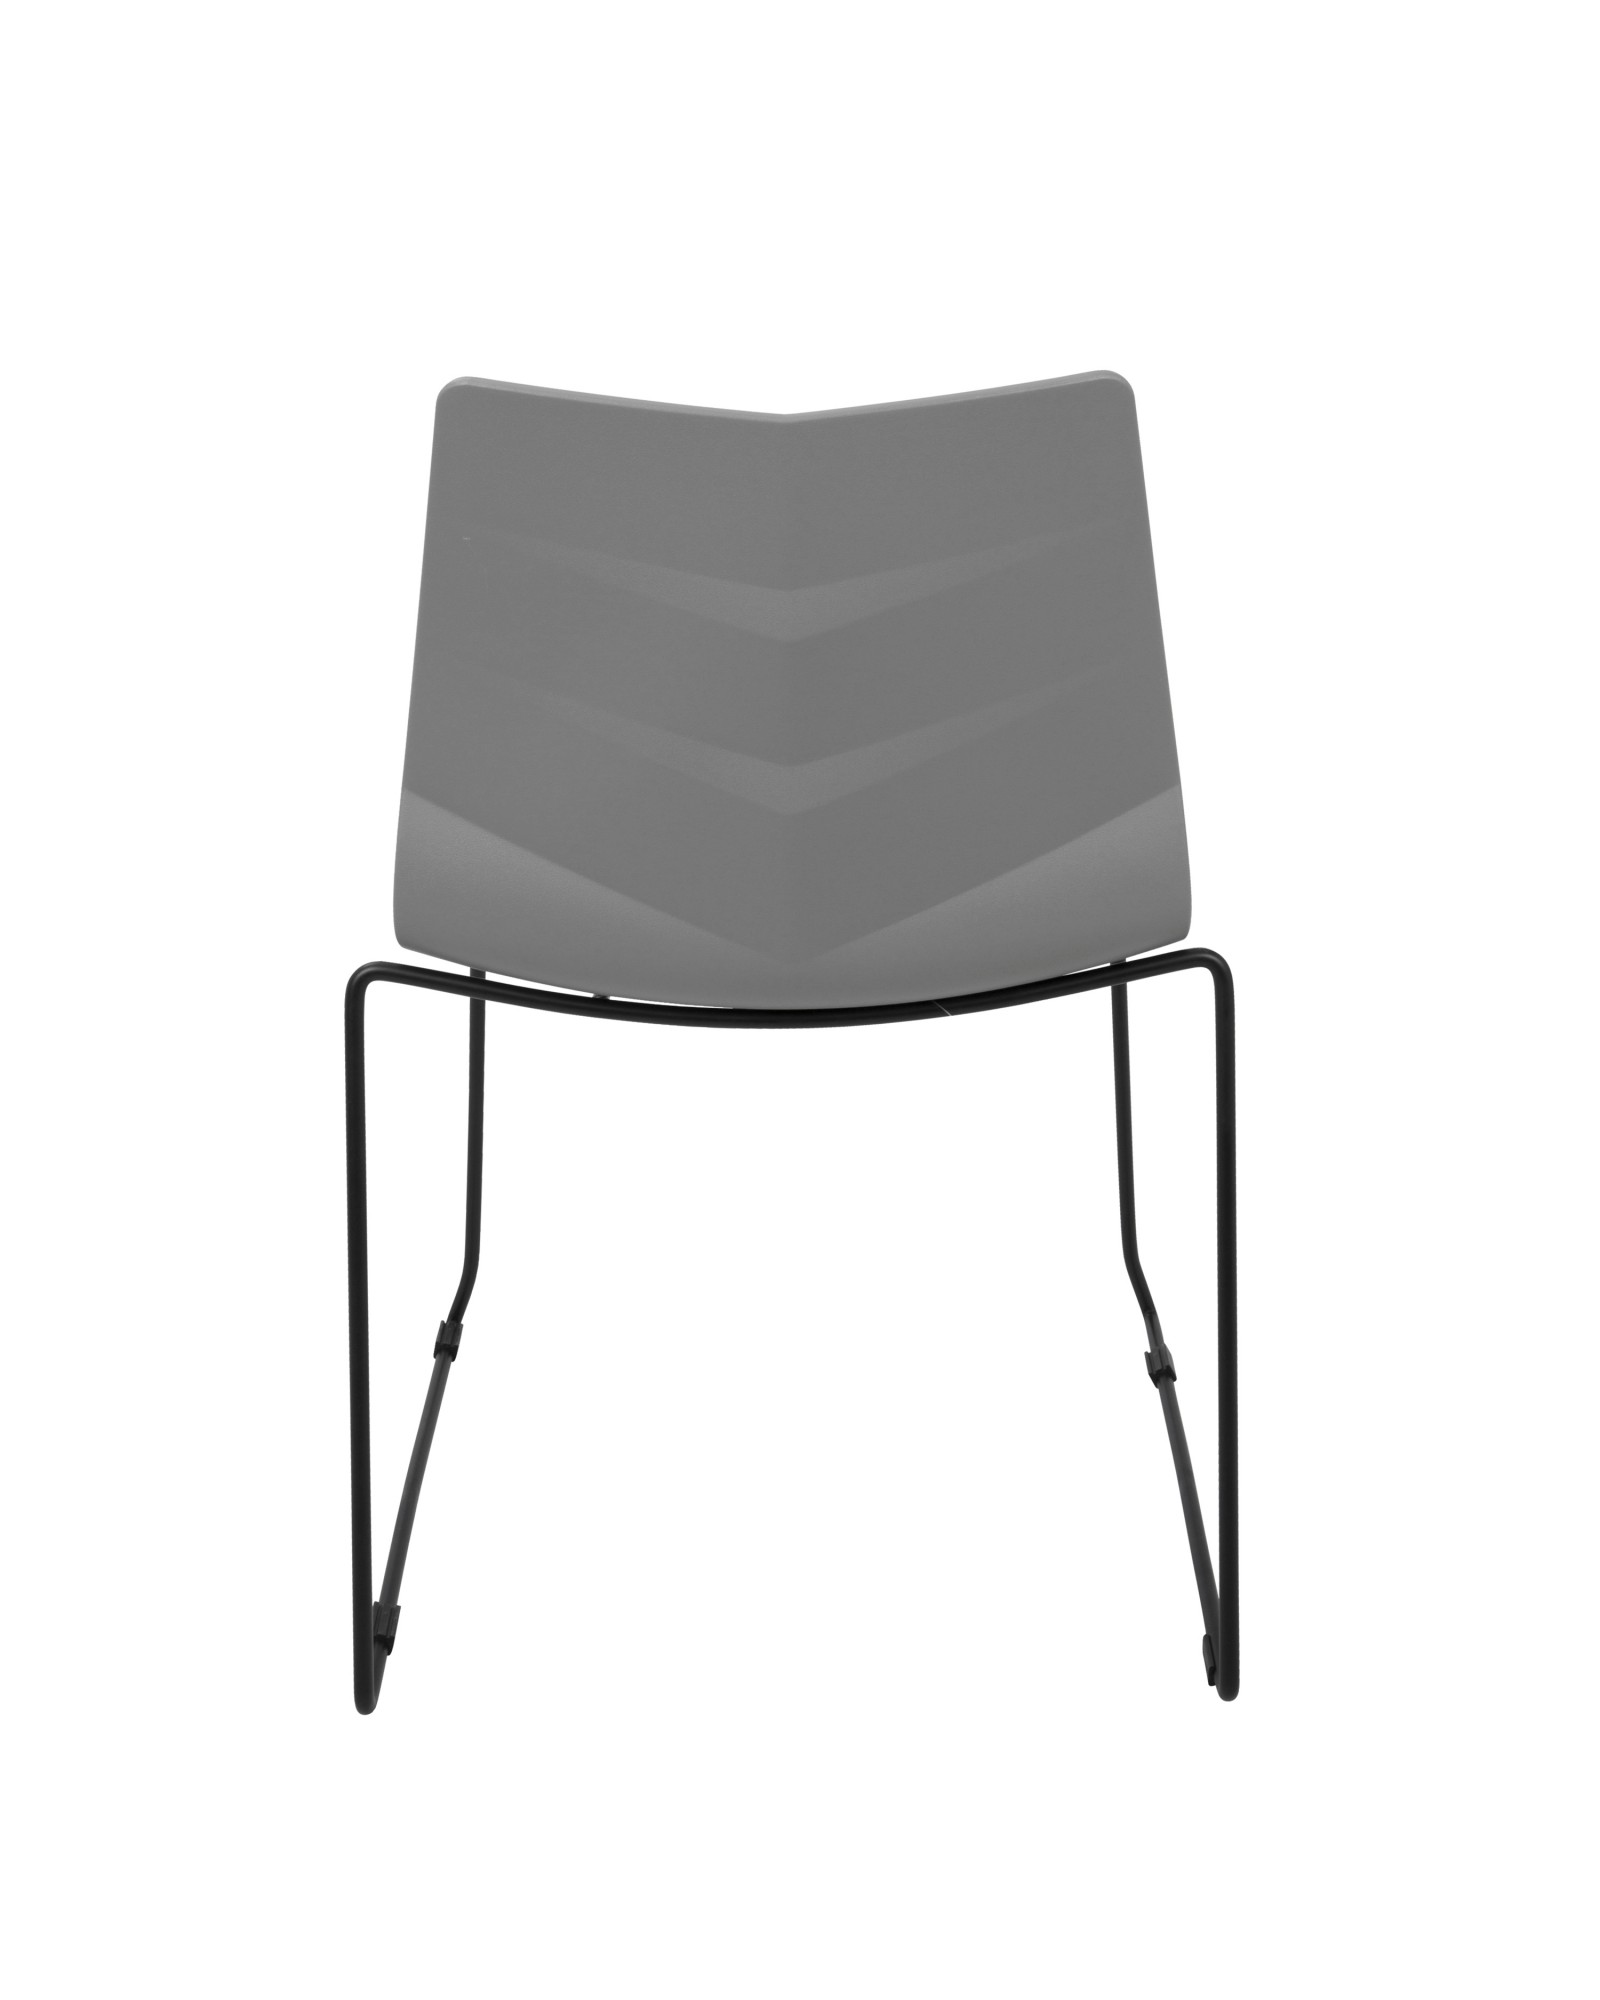 Arrow Contemporary Dining Chair in Black and Grey - Set of 2